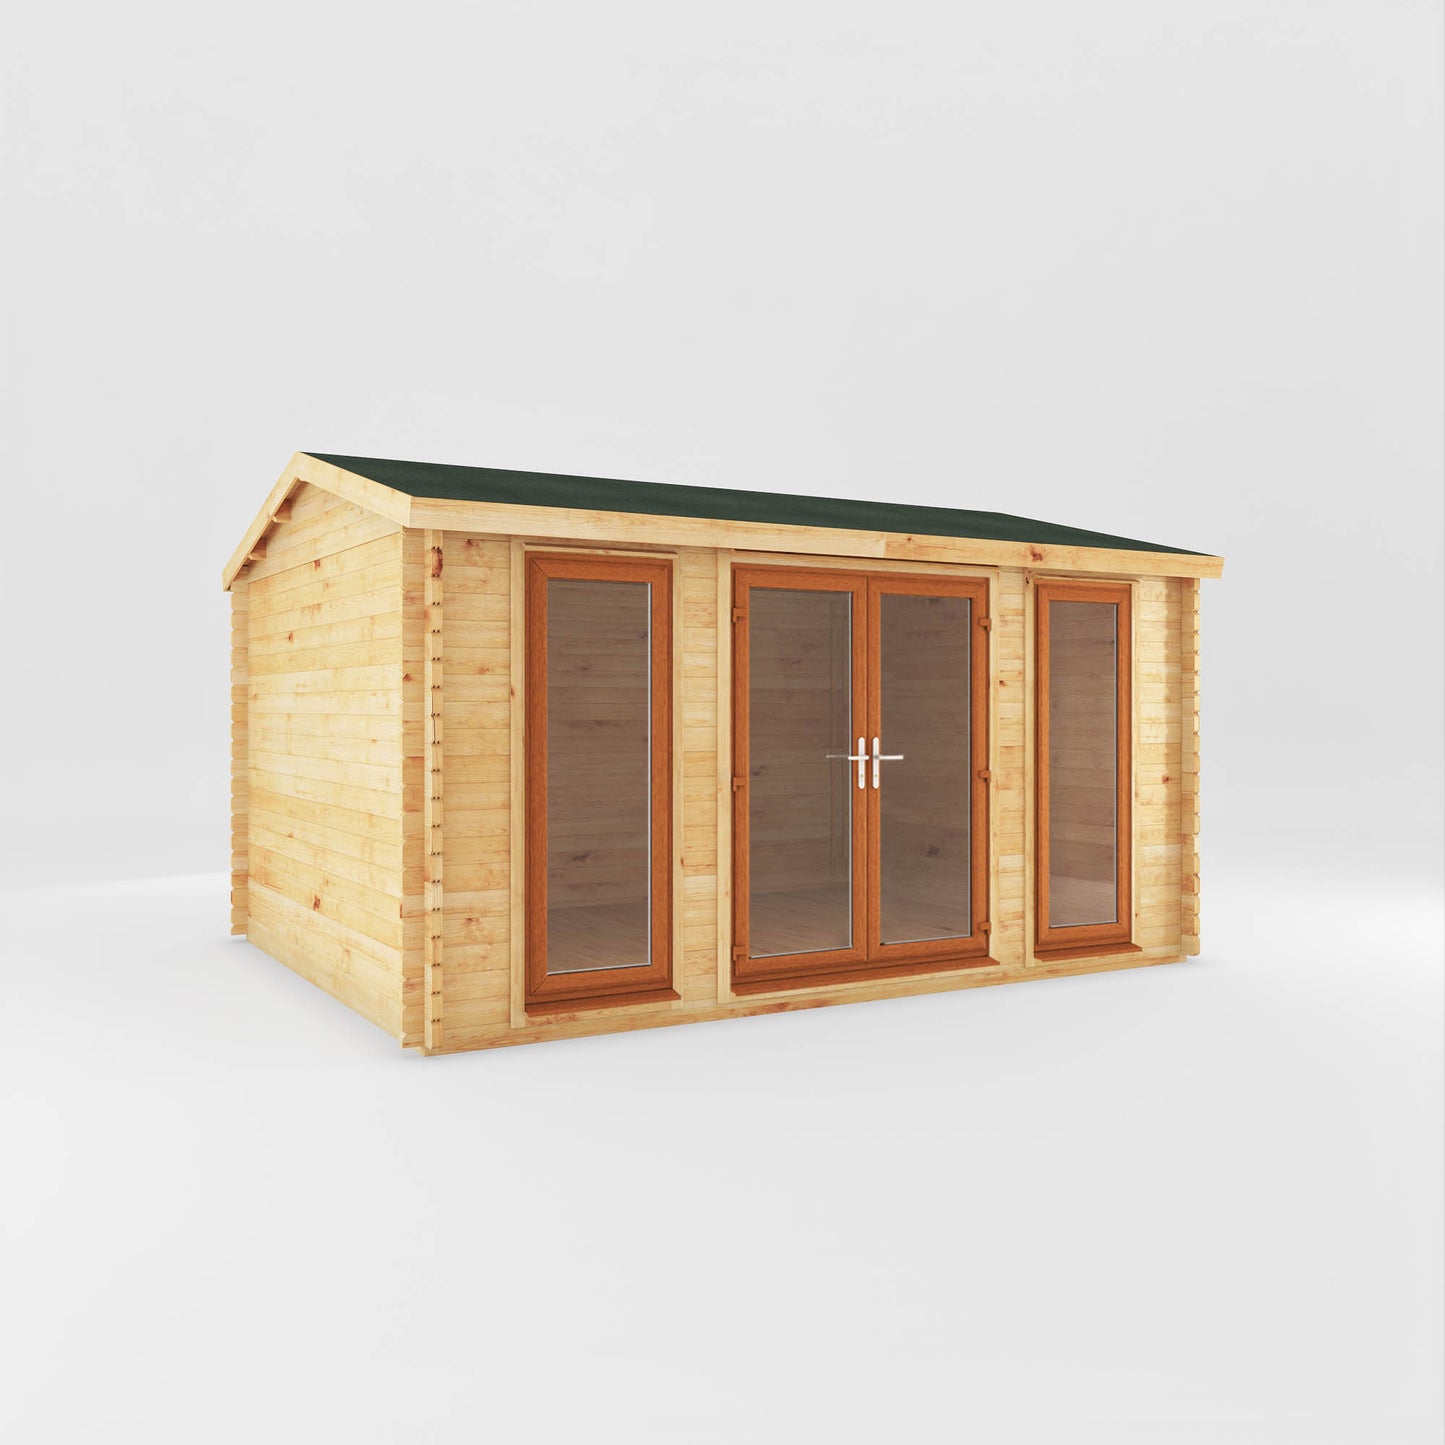 The 4.5m x 3.5m Dove Log Cabin with Oak UPVC